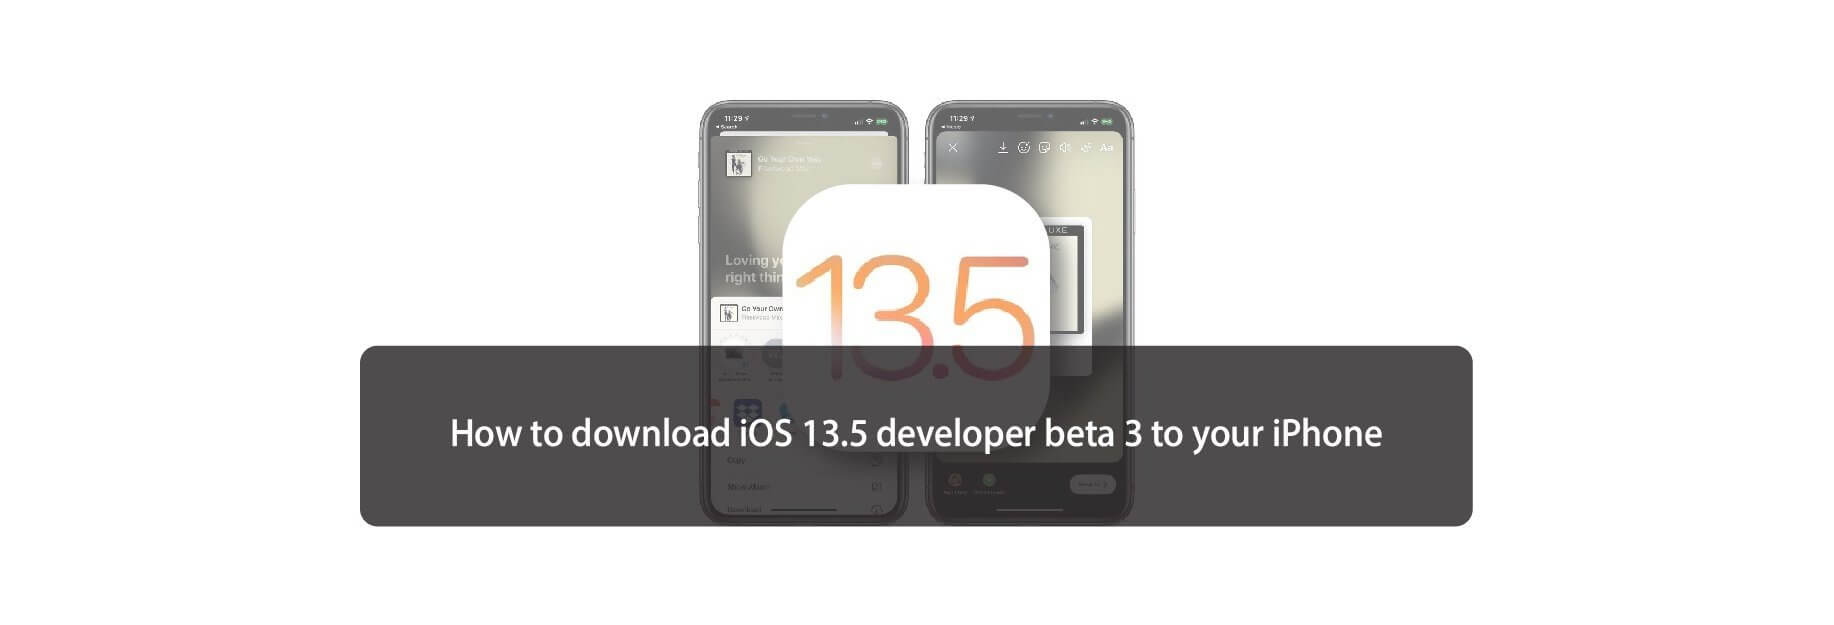 How to download iOS 13.5 developer beta 3 to your iPhone